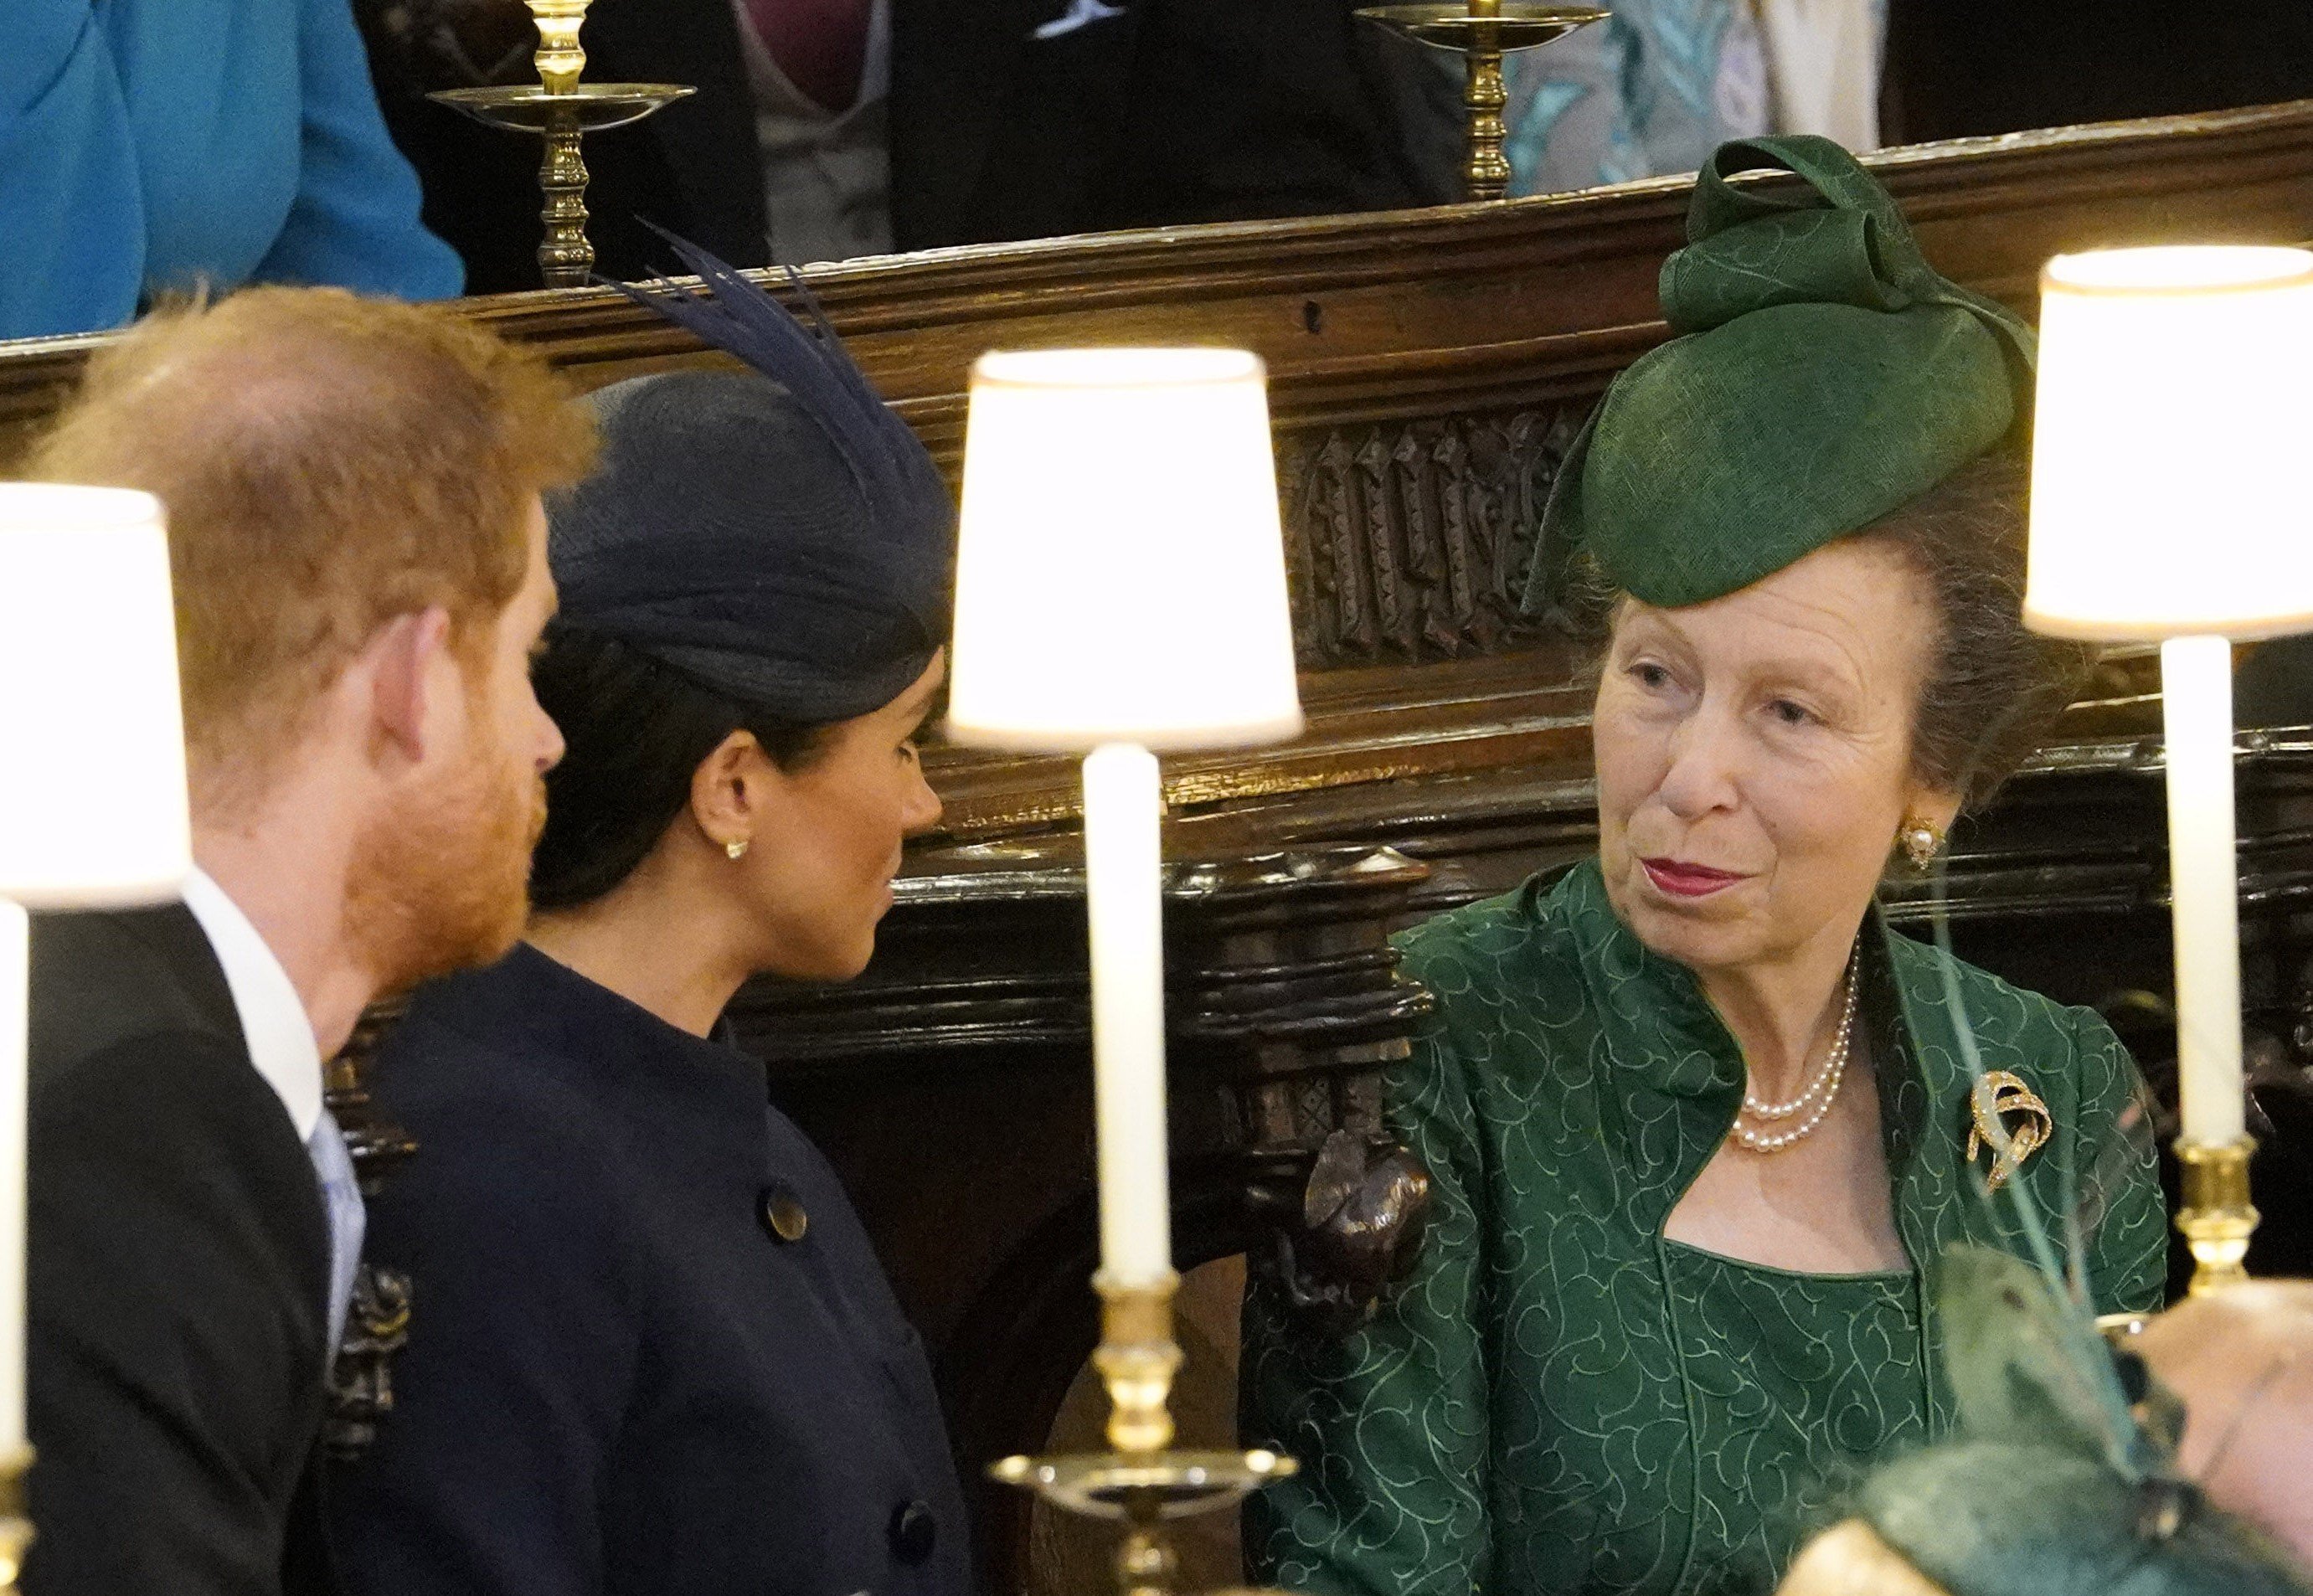 Prince Harry, Meghan Markle, and Princess Anne, who a Physic says 'saw straight through' the duchess, in their seats at Princess Eugenie's wedding